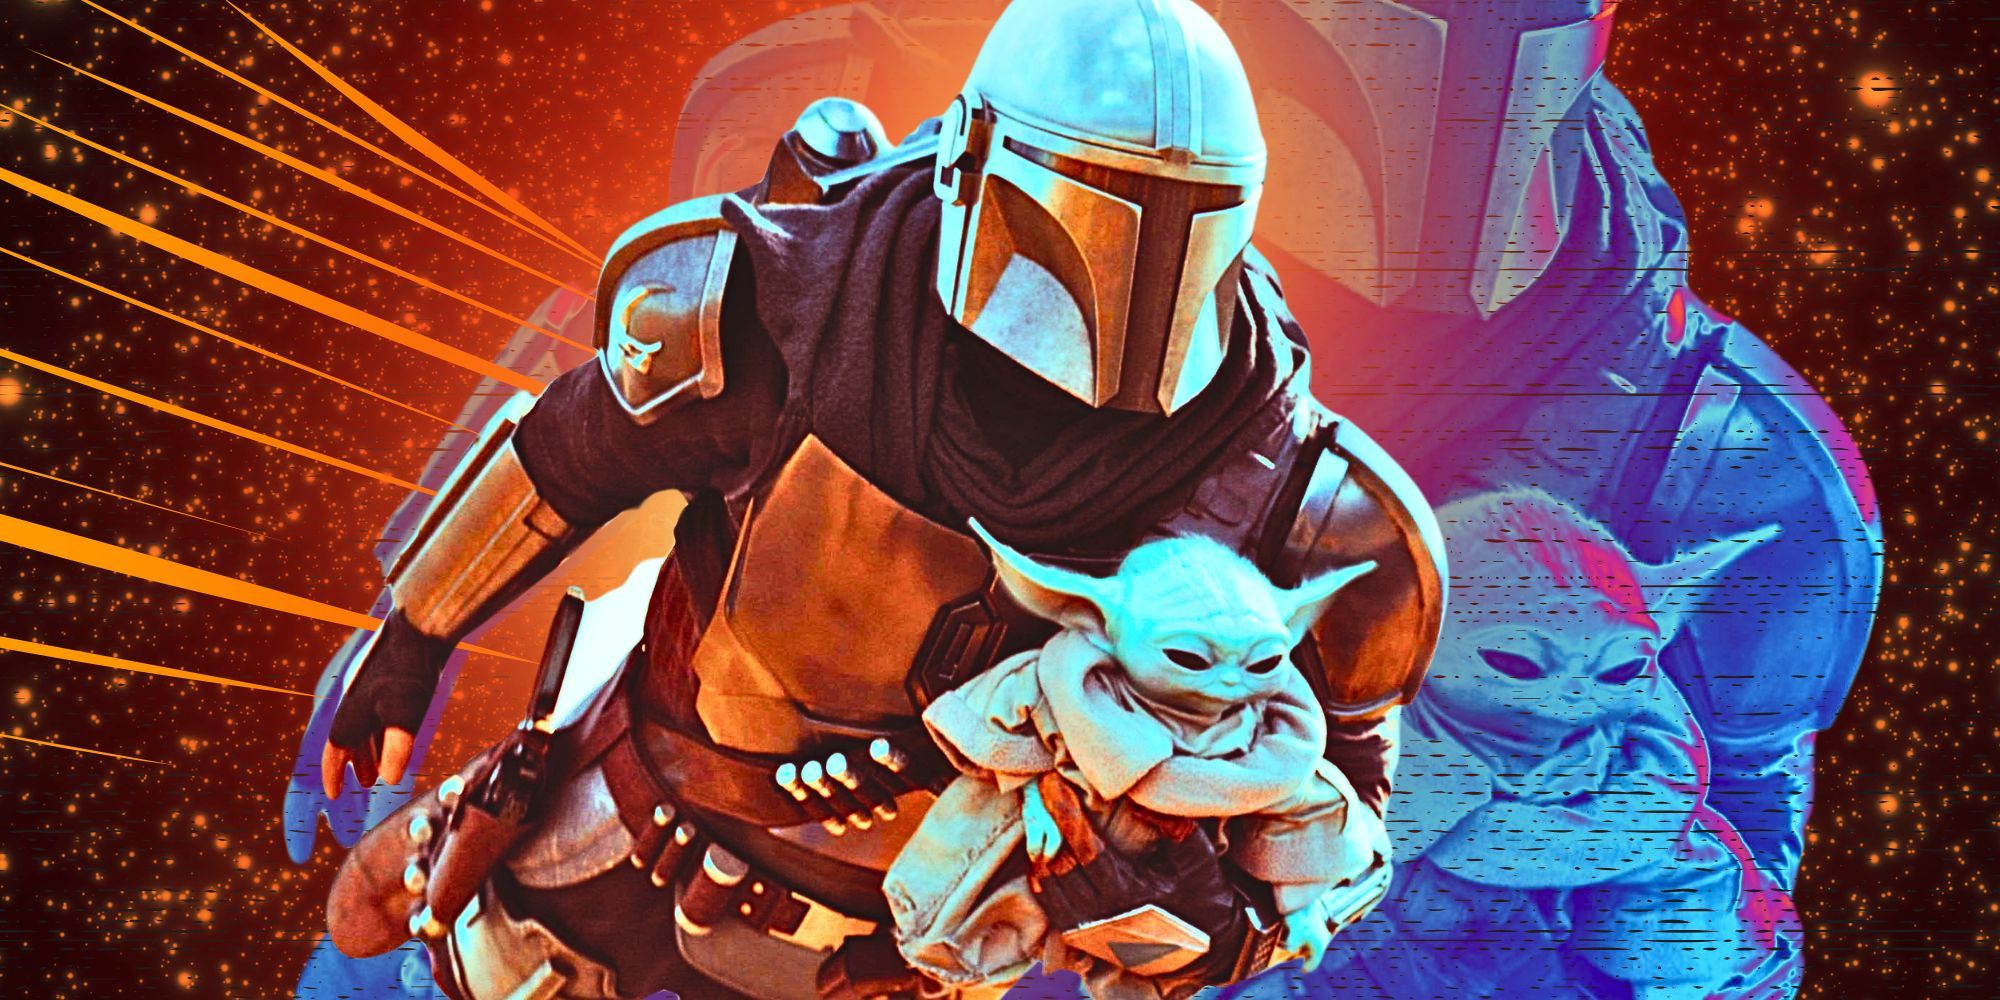 New Star Wars Movie Featuring The Mandalorian and Baby Yoda coming